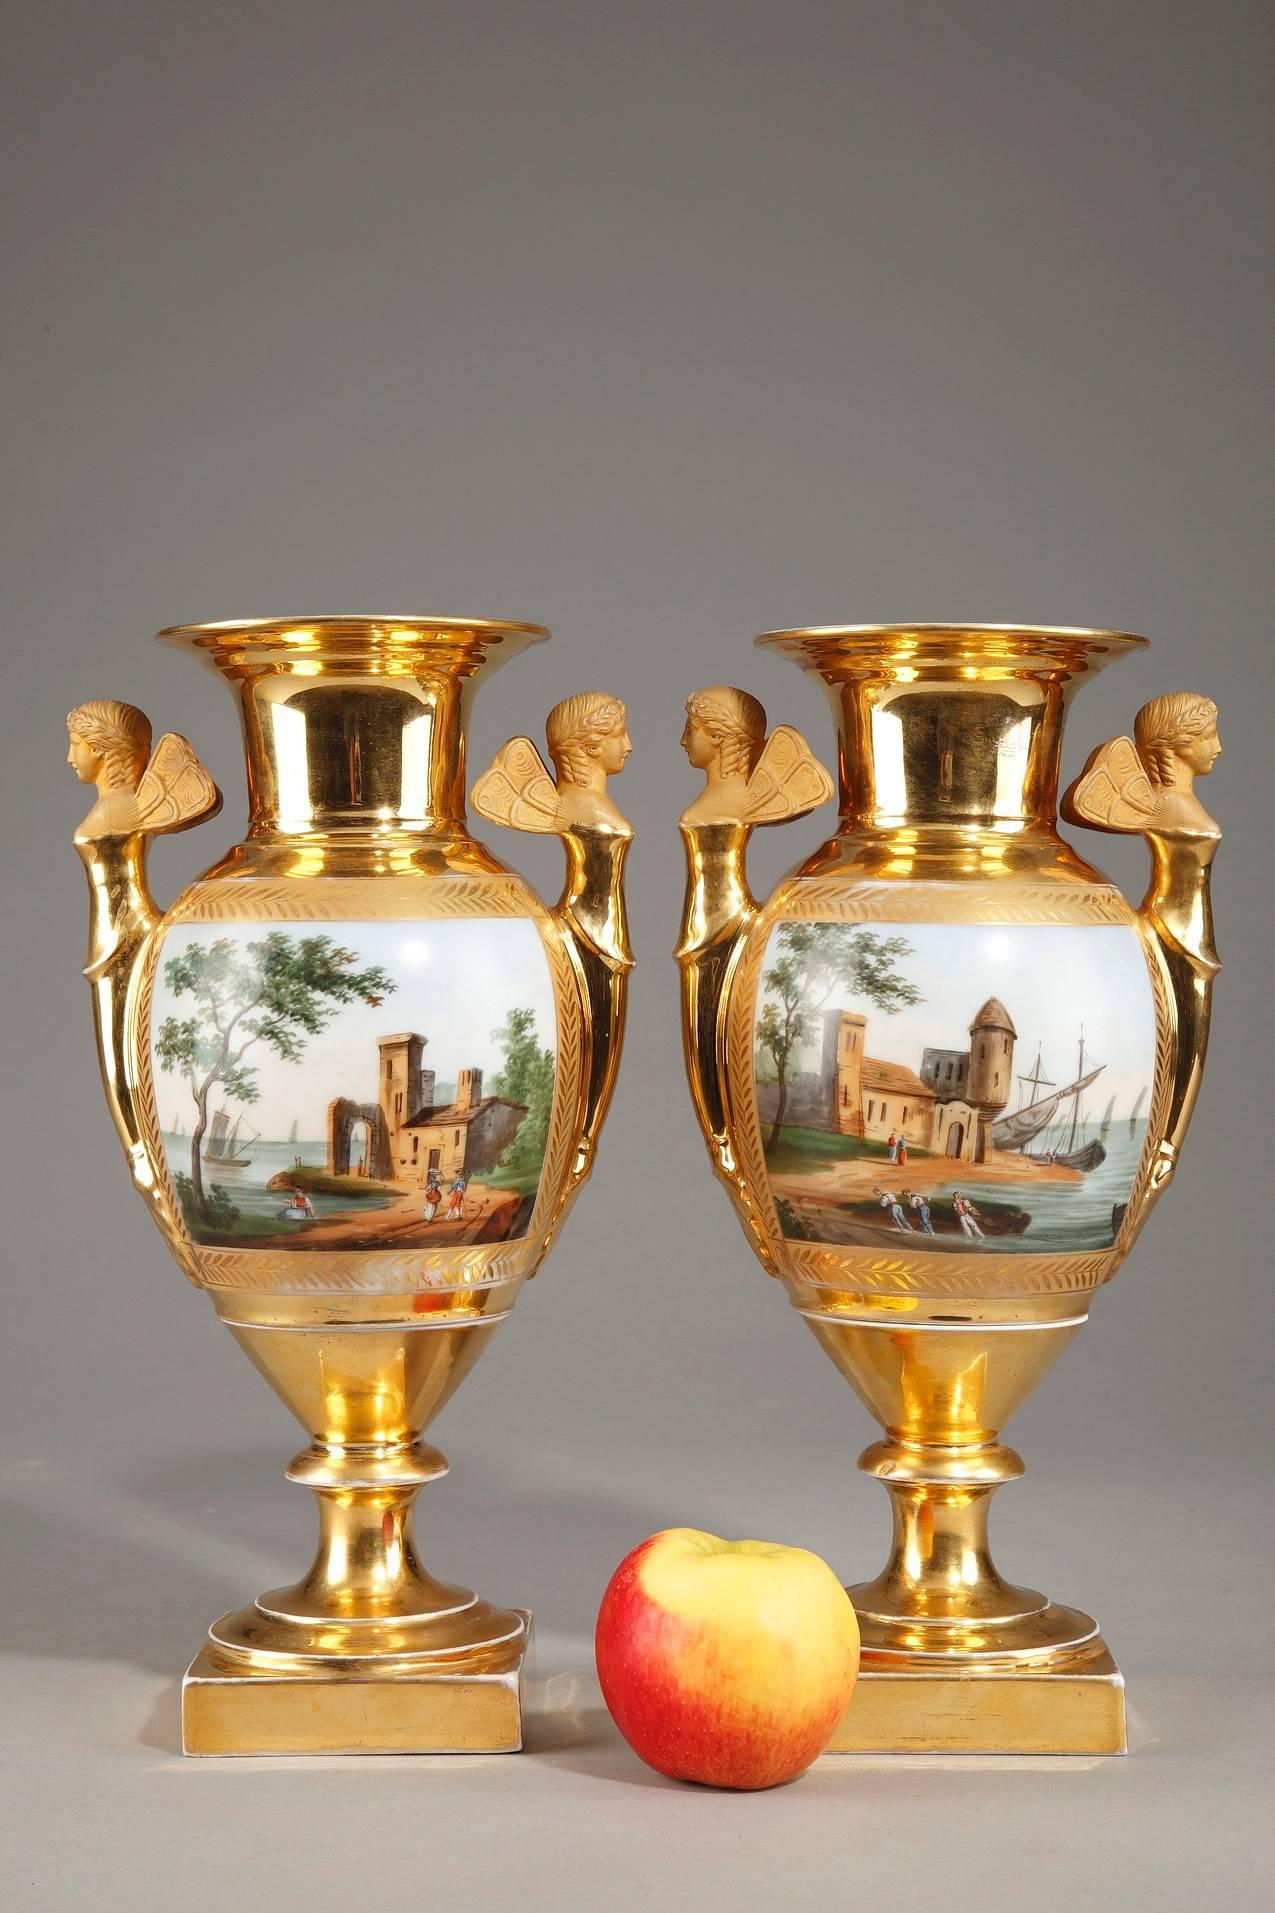 Pair of oval-shaped, porcelain vases with tiered stems on rectangular bases. The short handles of the vases are in the shape of winged women. The bodies of the vases are decorated with domestic scenes on one side and seaside landscapes on the other.